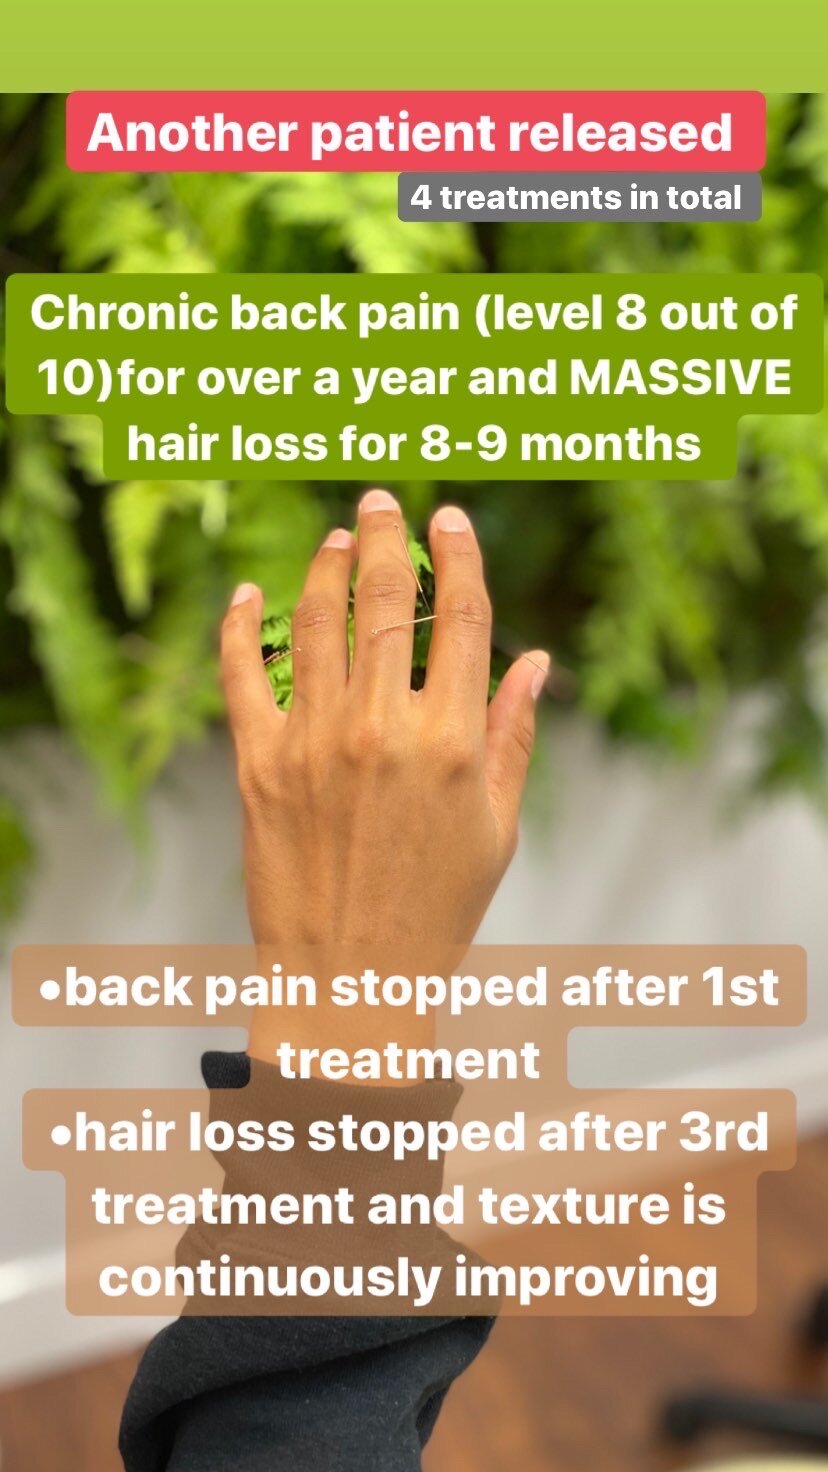  SuJok acupuncture based in vancouver at alla ozerova acupuncture clinic used to treat pain syndrome. Patient suffered from lower back pain and massive hair loss. After first treatment patient stopped feeling back pain and hair loss stopped after 3rd